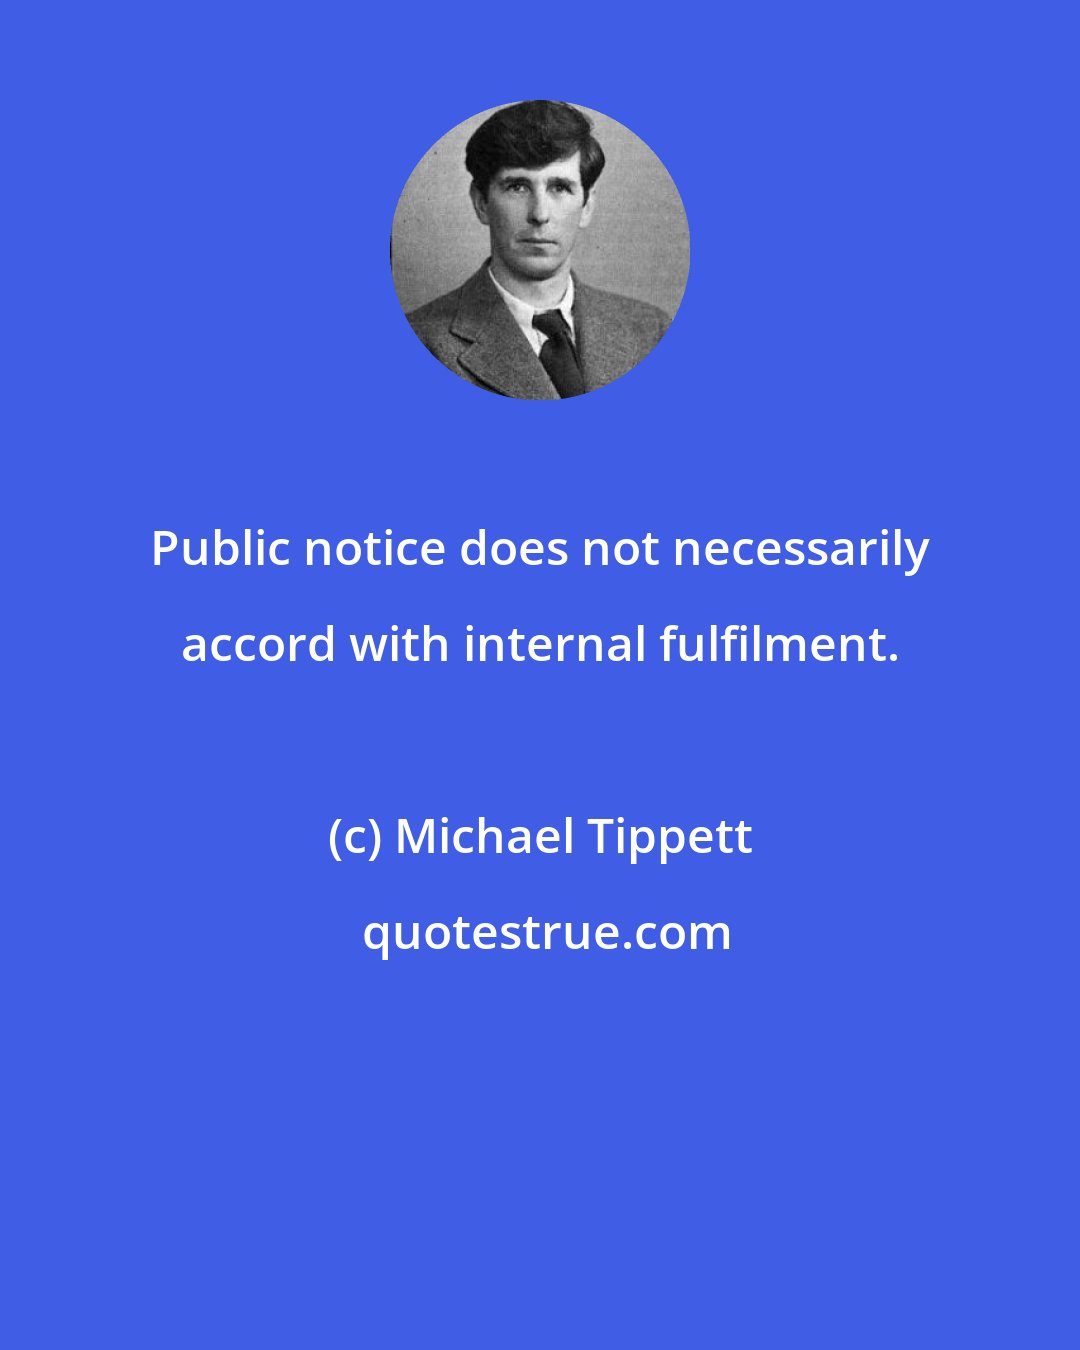 Michael Tippett: Public notice does not necessarily accord with internal fulfilment.